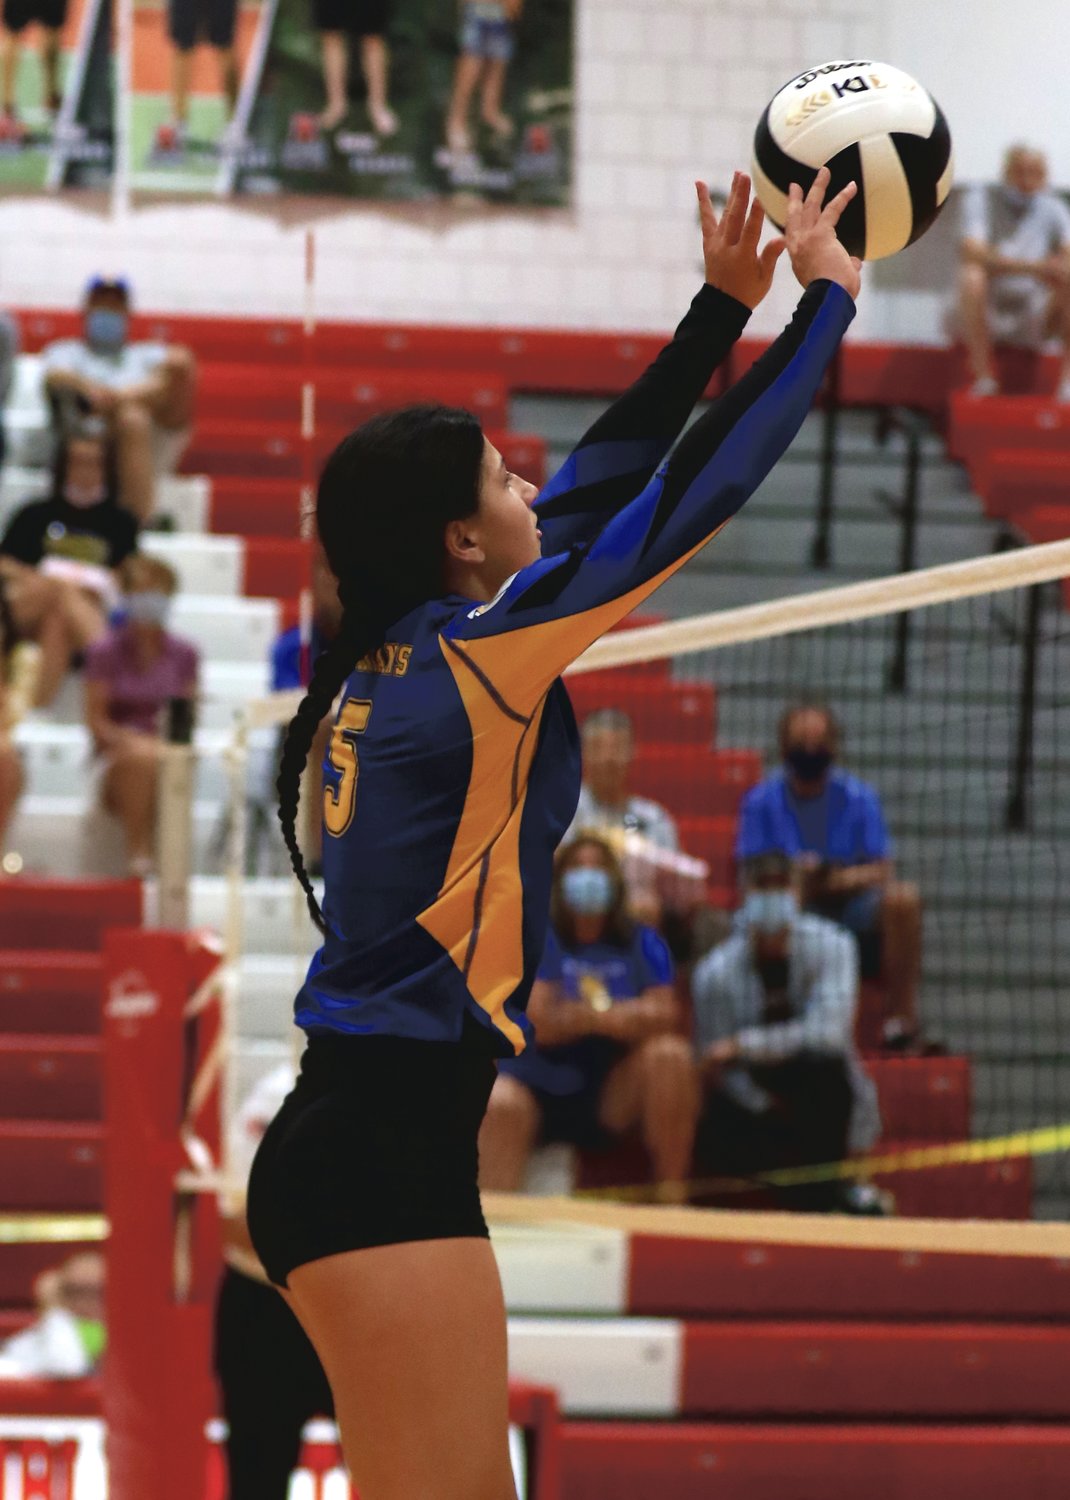 Shea Williamson sets up a teammate in the Athenians sweep over Attica on Thursday.